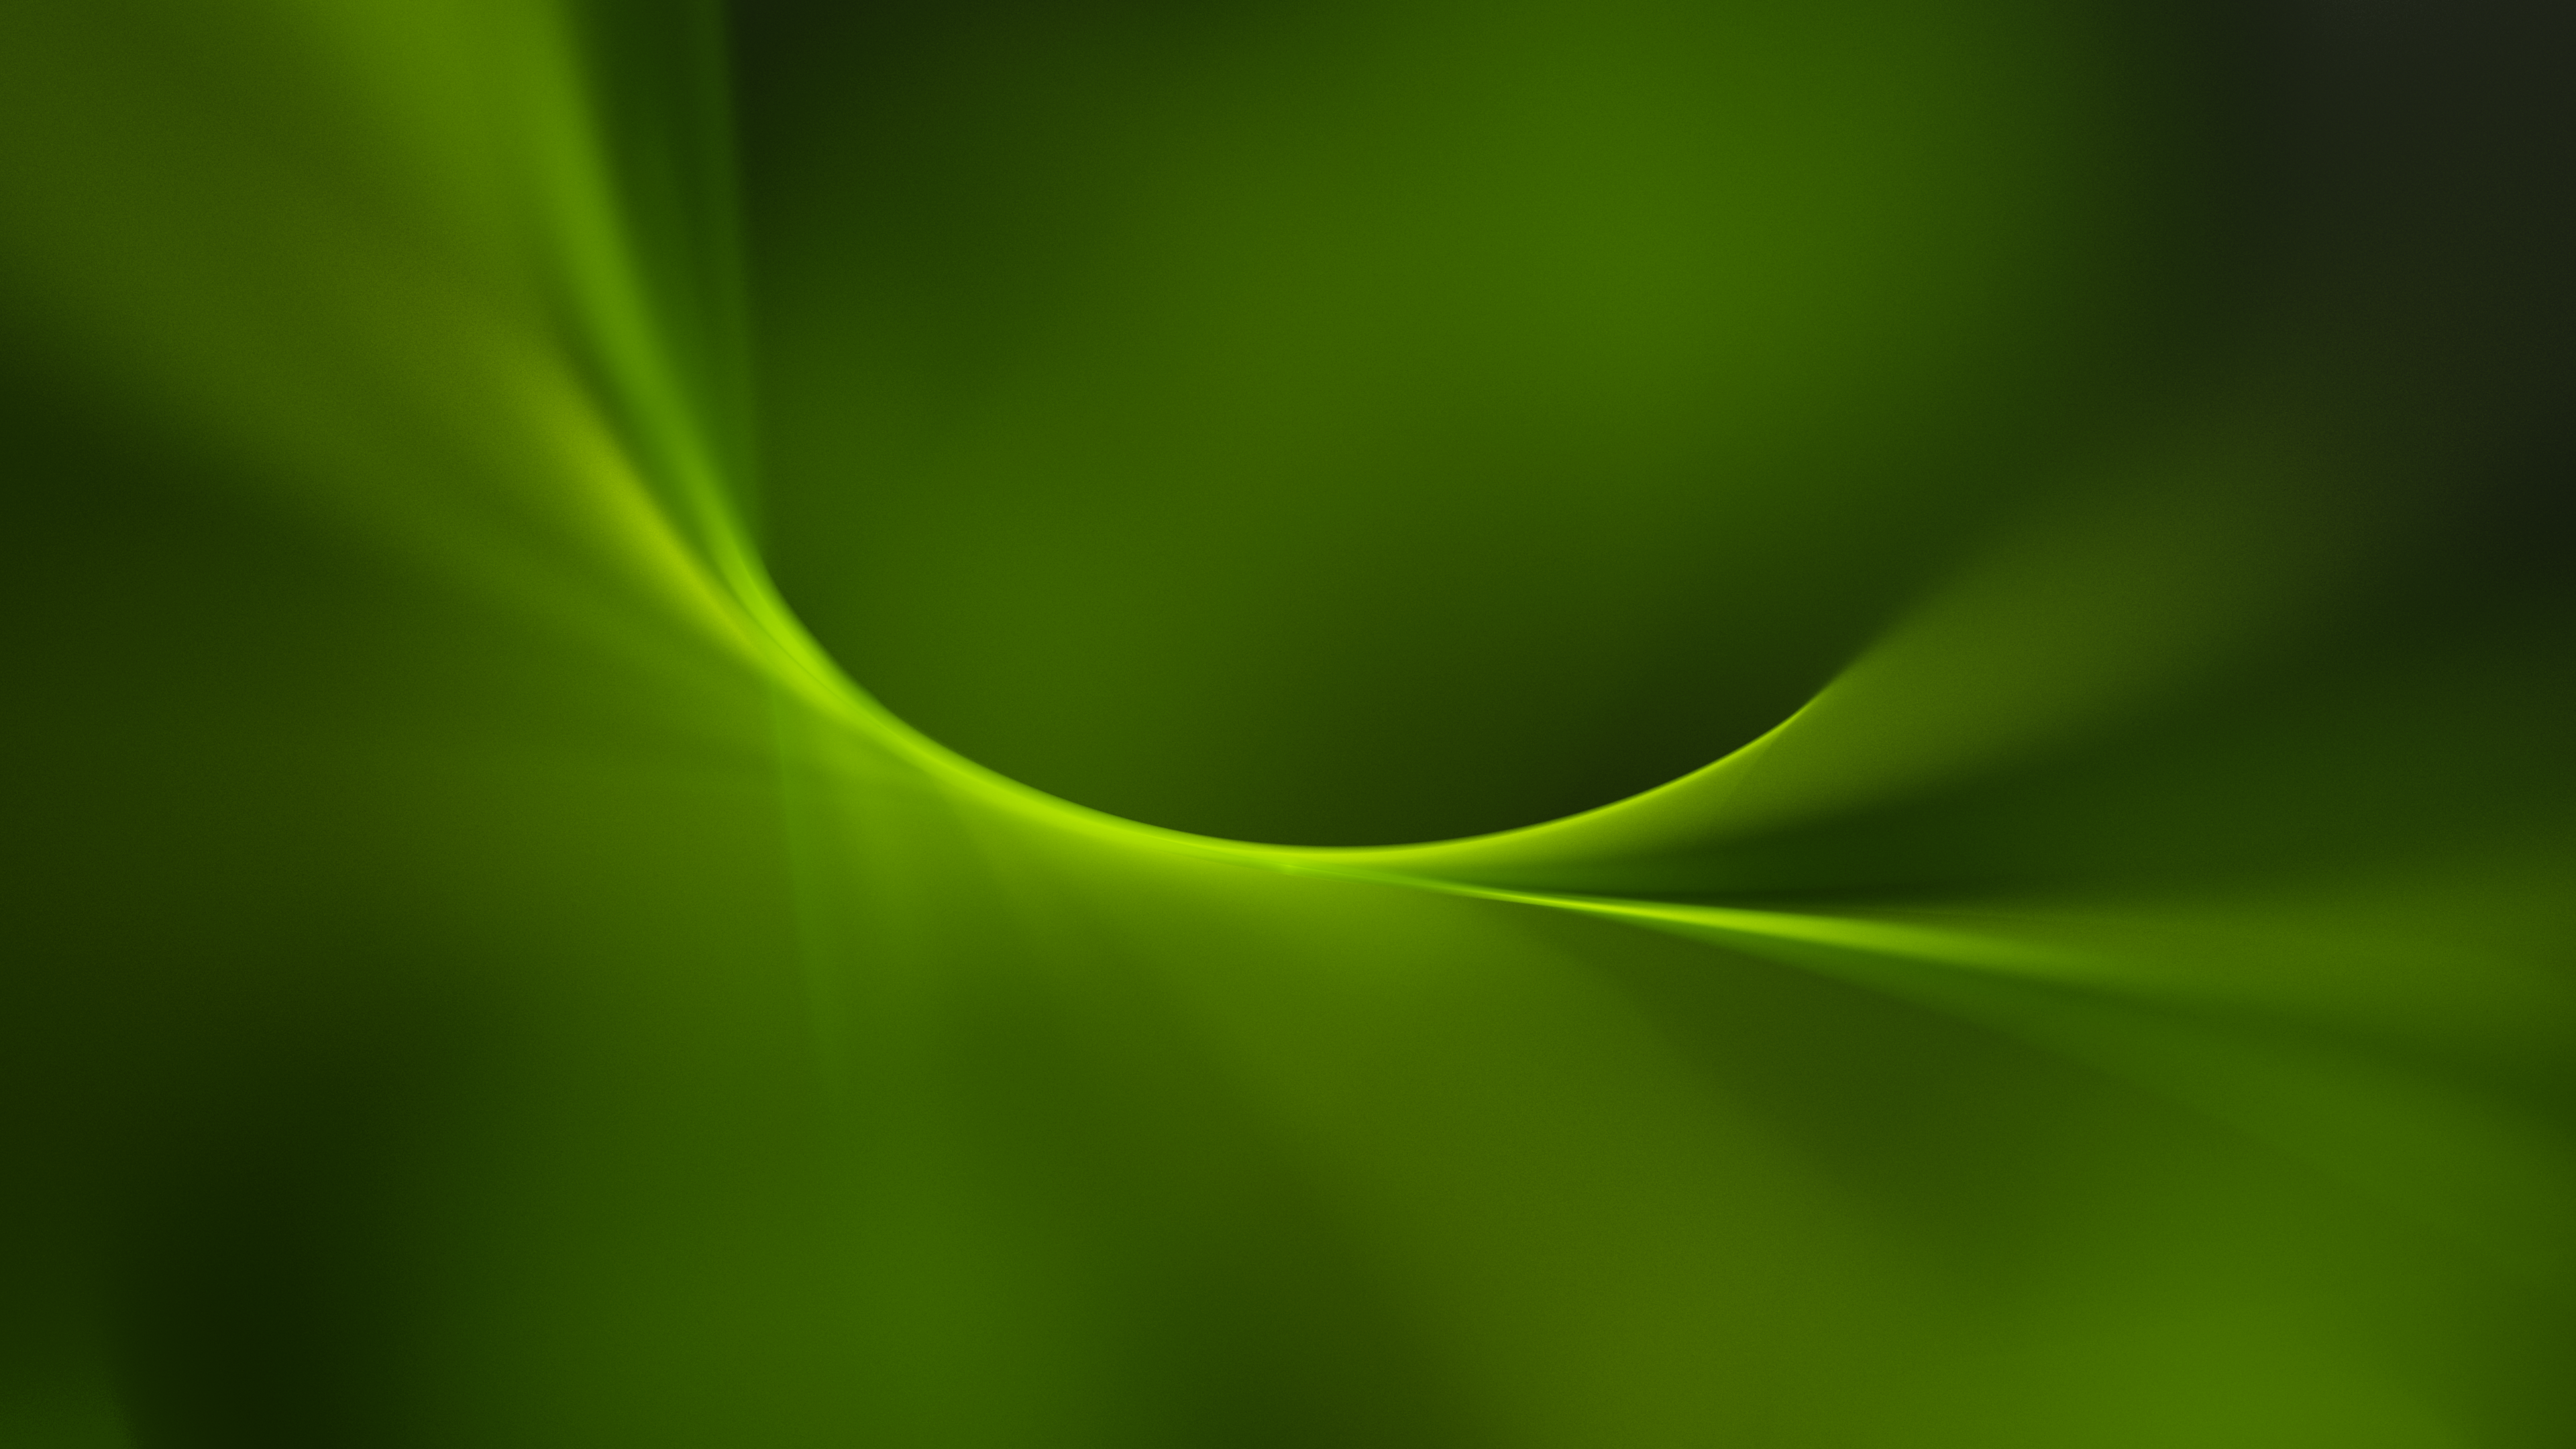 General 3840x2160 Apophysis 3D fractal abstract minimalism green green background